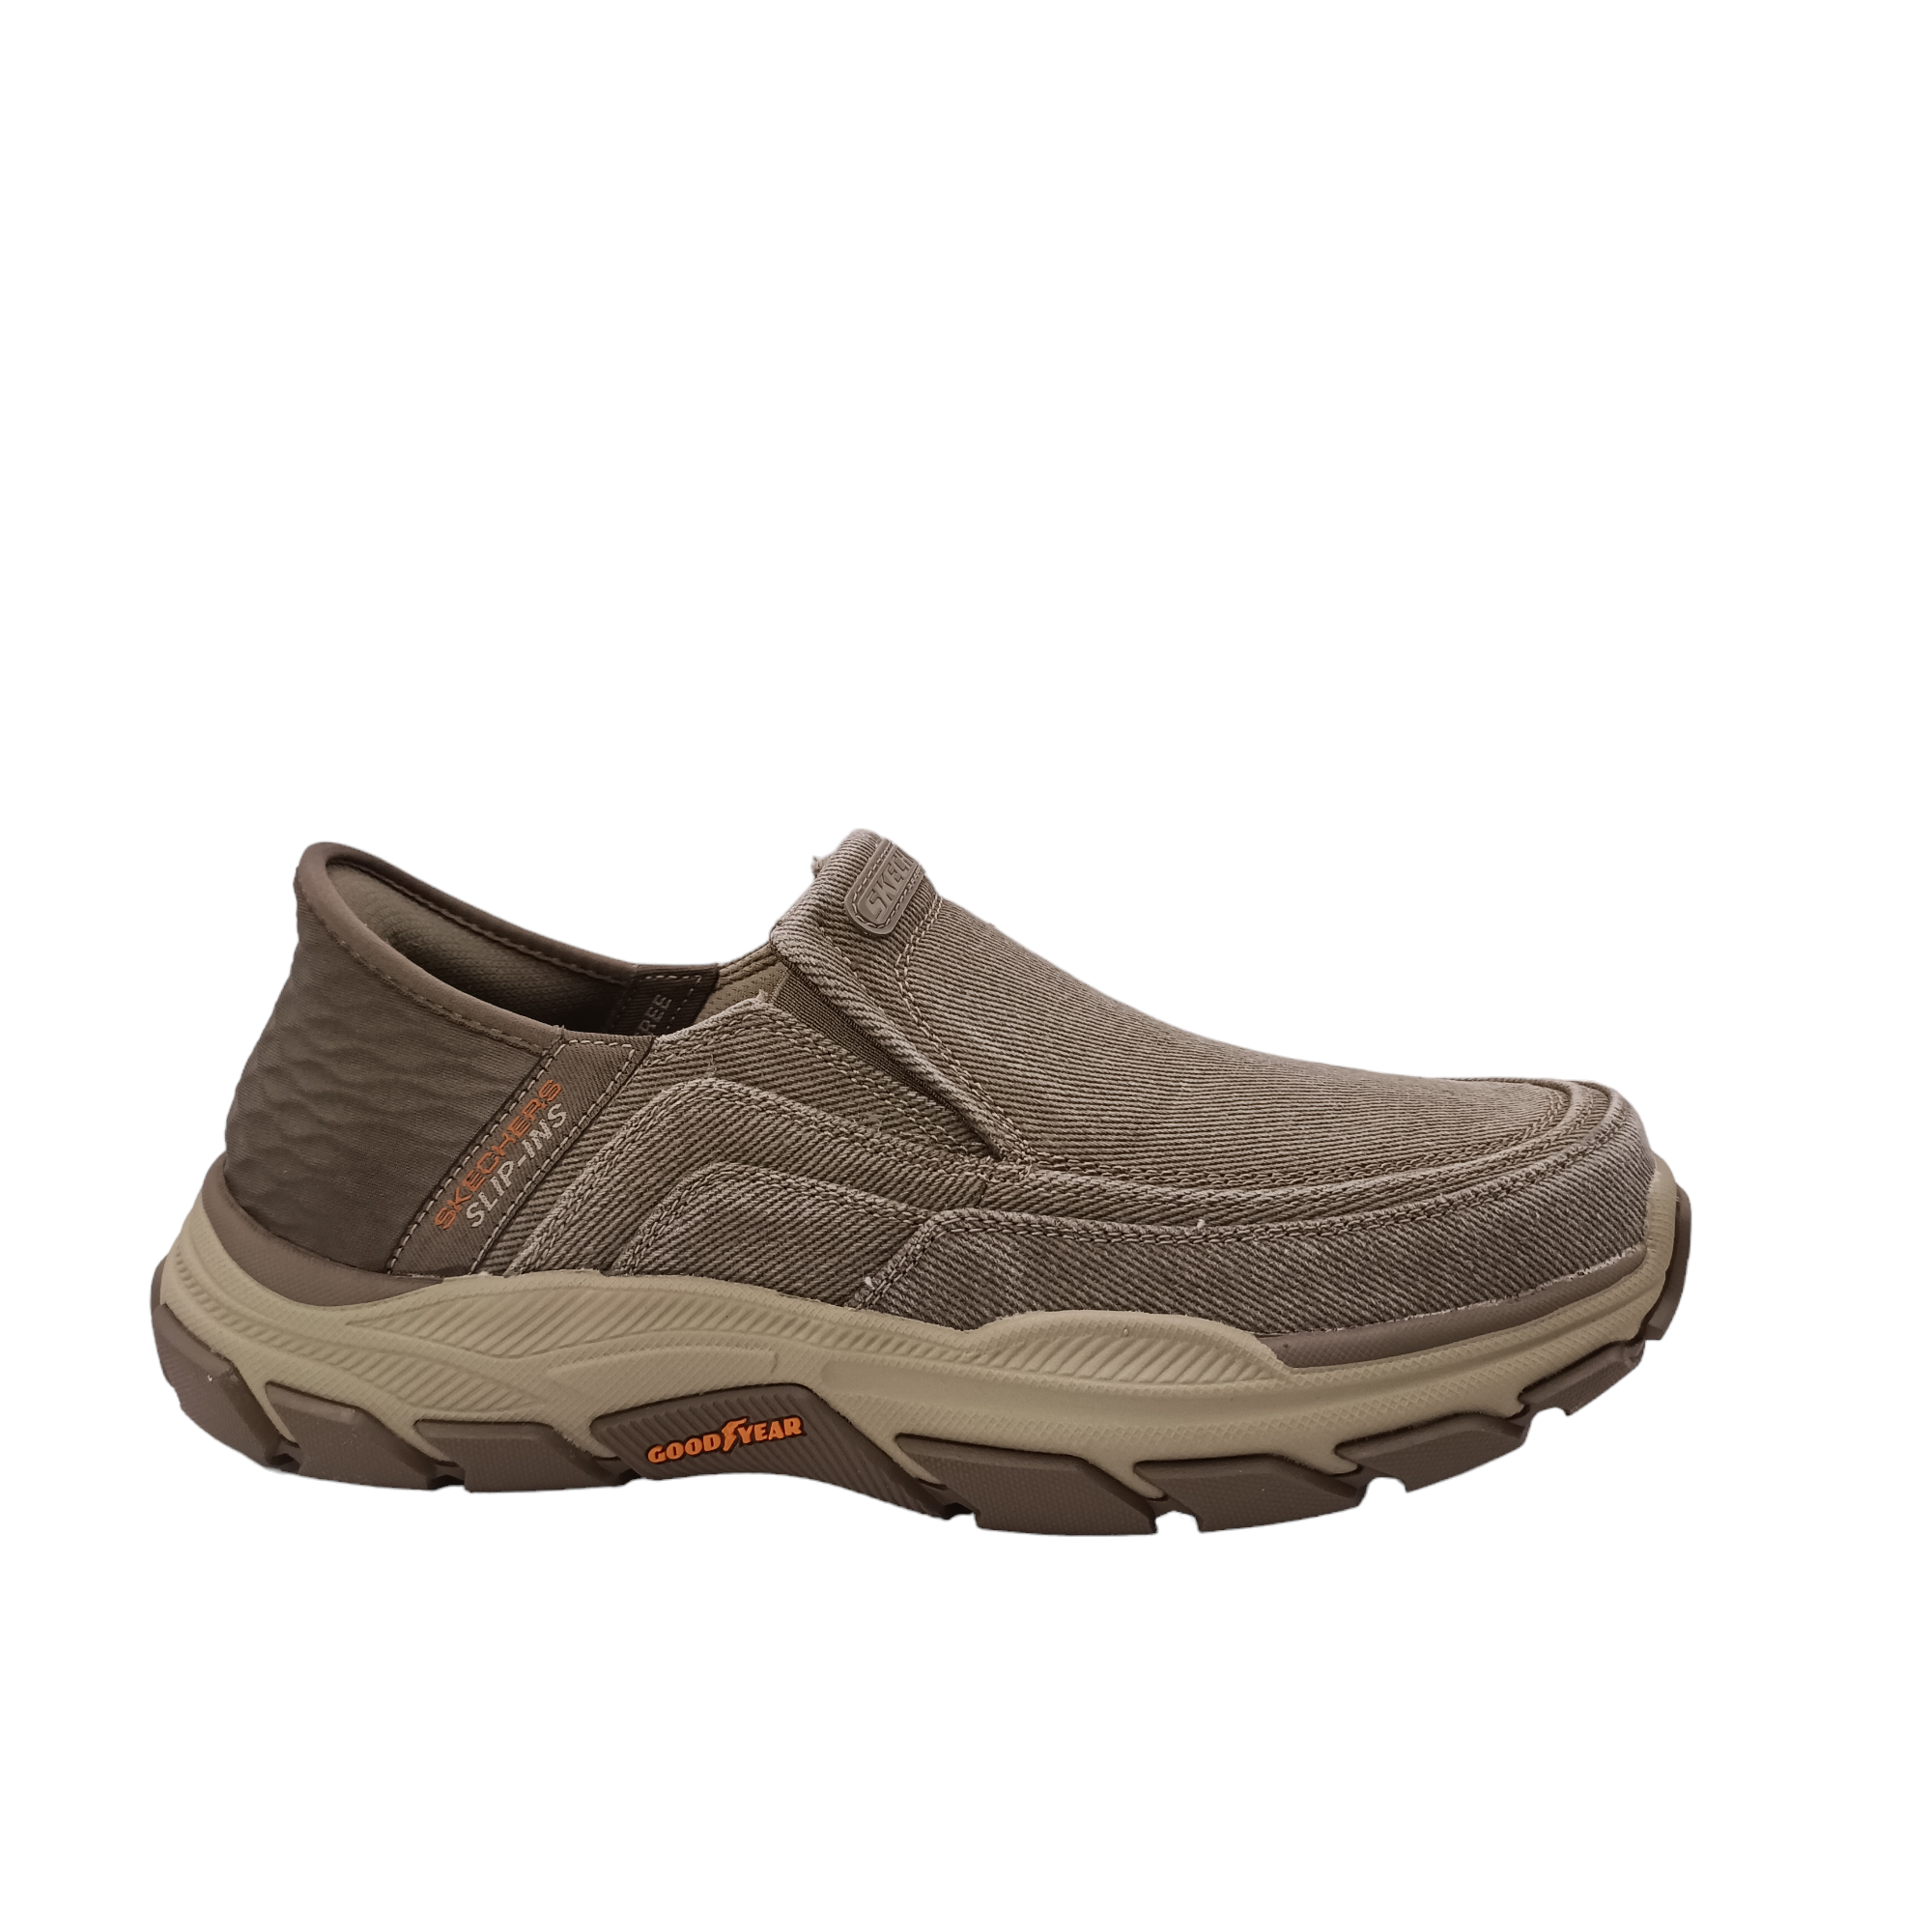 Holmgren from Skechers. Side angled view of shoe with slip-in technology on the heel, a firm and cushioned heel for easy entry without hands. Rugged looked sole with a synthetic upper with visible stitching. Wide fitting with two small external gussets. Shop Online and in-store with shoe&me Mount Maunganui Tauranga